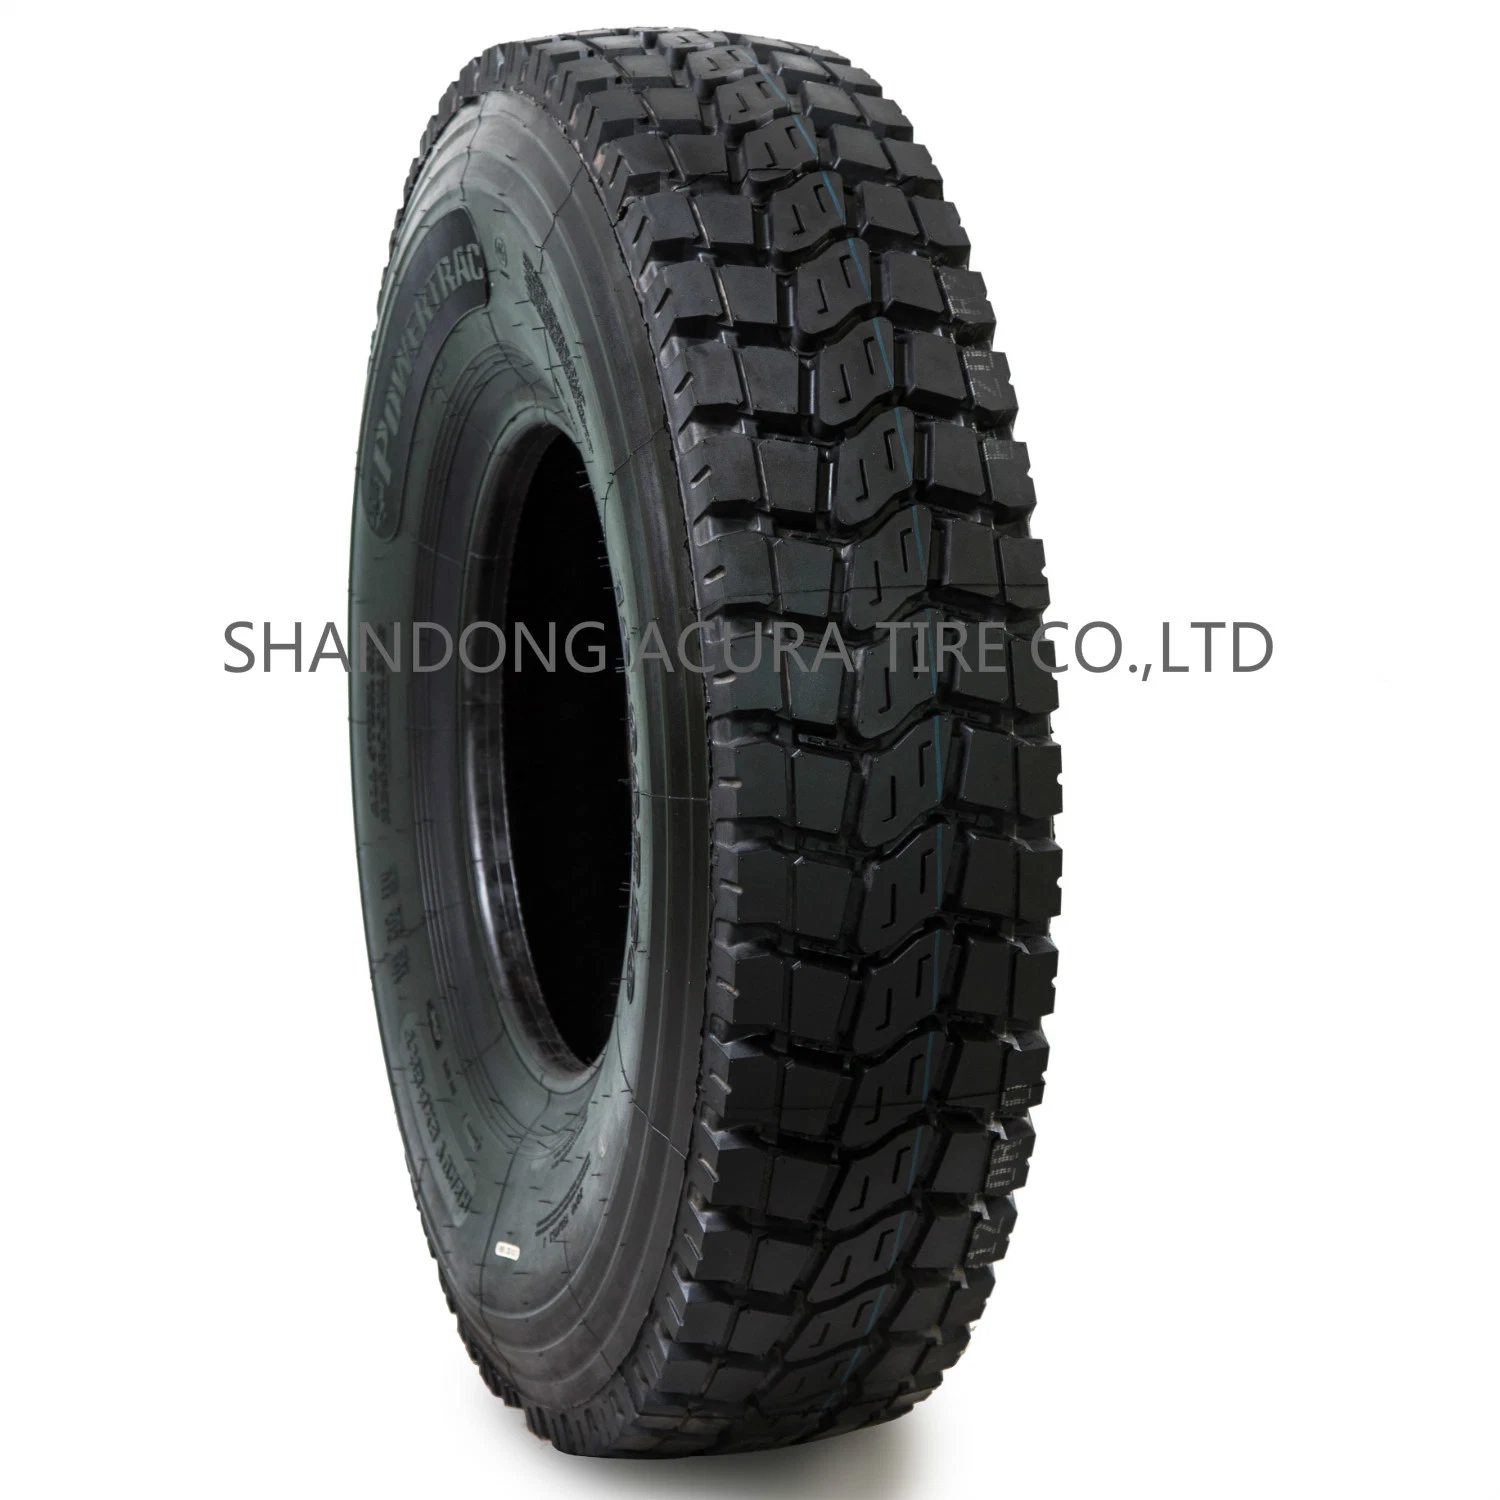 China Top Tire Manufacturer Heavy Truck Tire All Steel Radial Tire off Road Tire